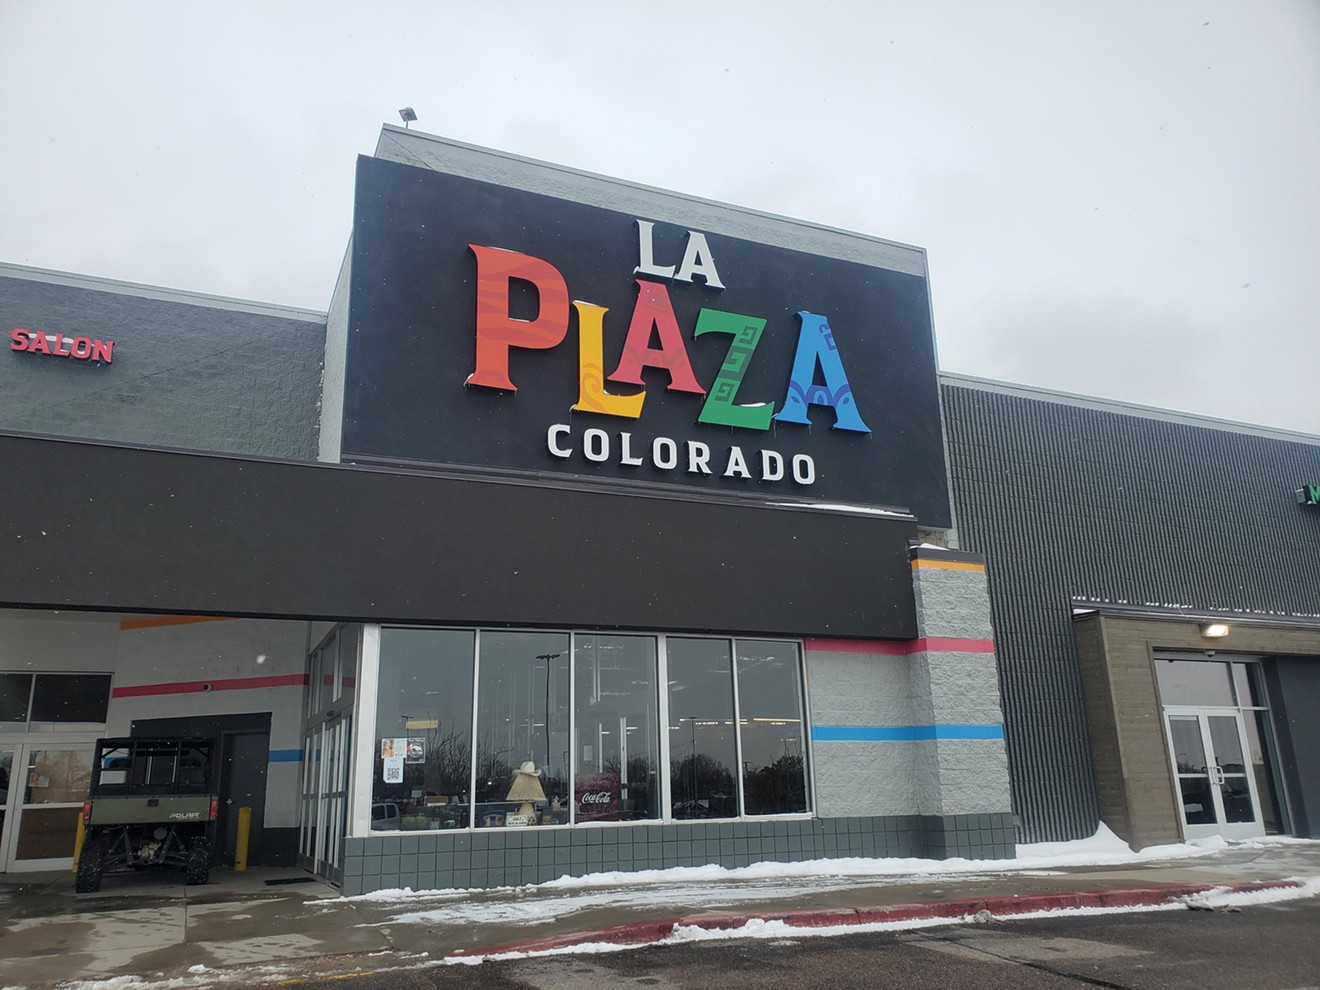 The goal of La Plaza is to provide entrepreneurial opportunities for local, Hispanic mom-and-pop shops.